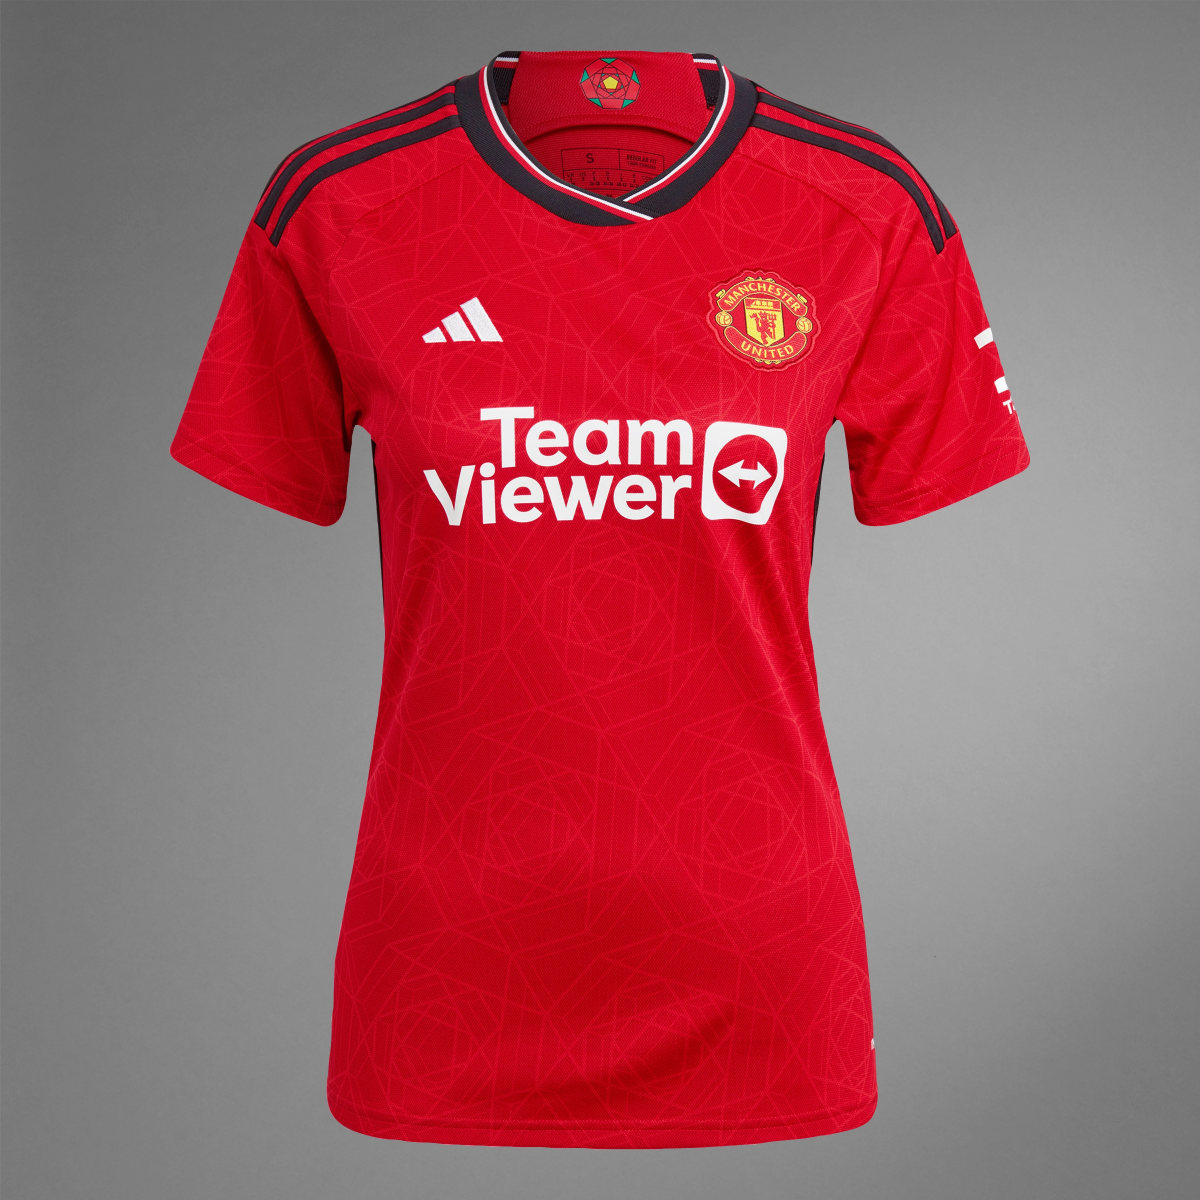 Adidas Manchester United 23/24 Home Jersey. 11